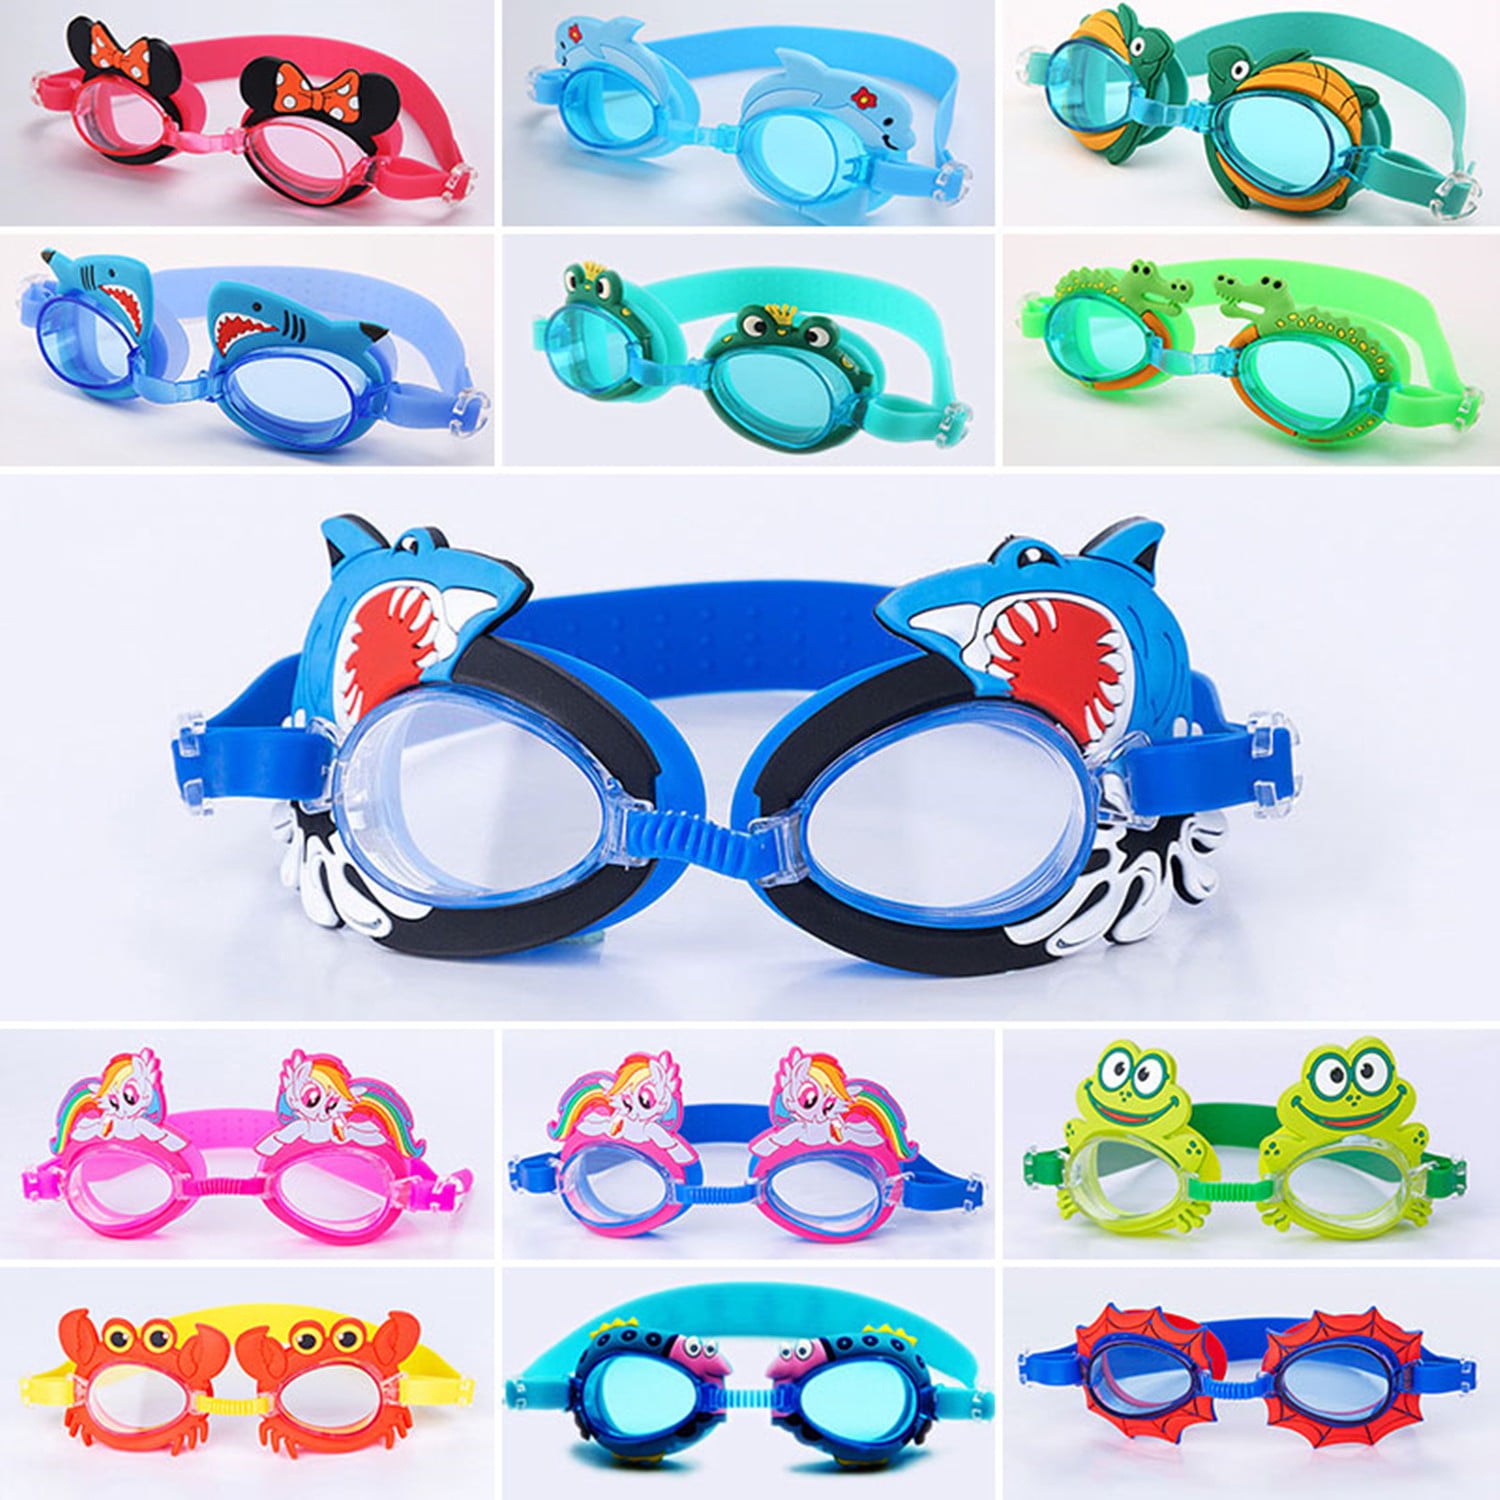 Childrens Goggles with No Leaking Anti-Fog Lens and UV Protection Kids Swimming Goggles,Adjustable Strap for 3-12 Girls and Boys